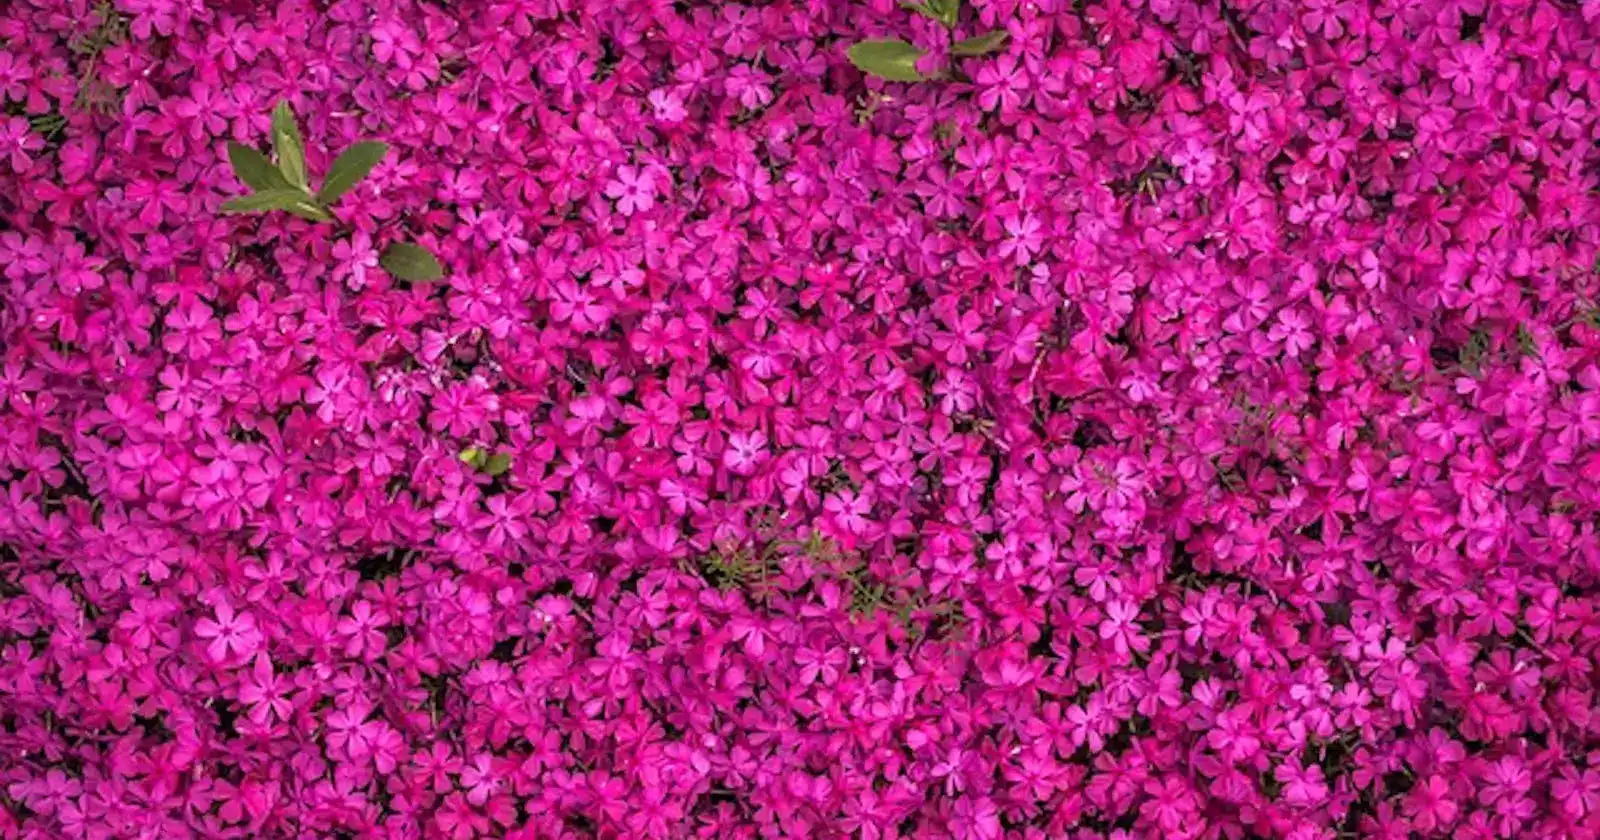 A vibrant pink flower bed adorned with numerous delicate flowers, creating a picturesque scene. Poem: Insta Crush.